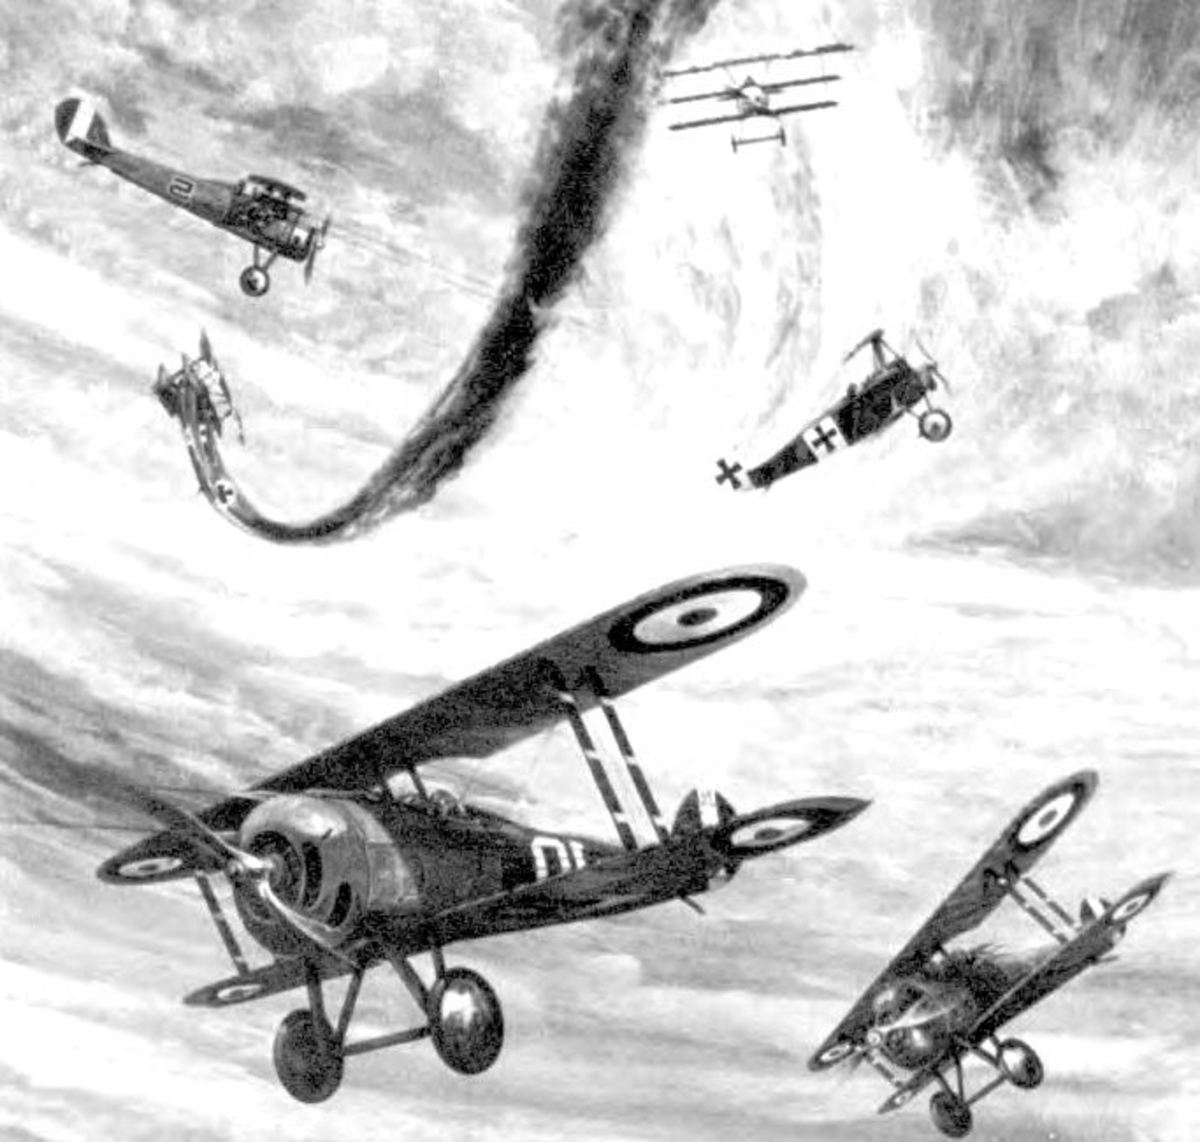 H.G. Wells predicted aerial combat, among other things.